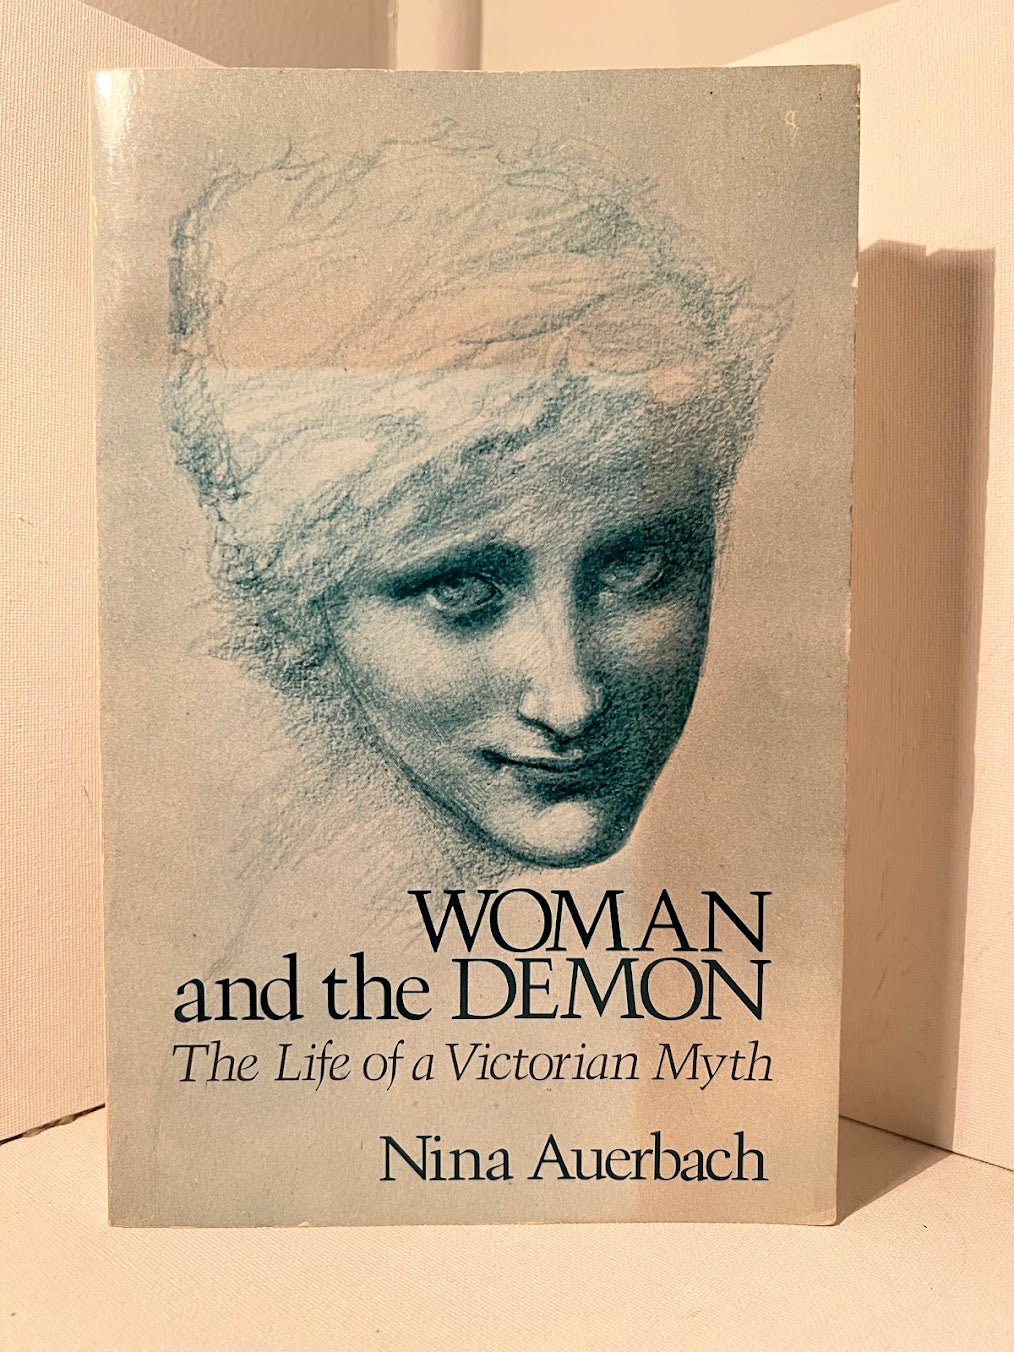 Woman and the Demon: The Life of a Victorian Myth by Nina Auerbach